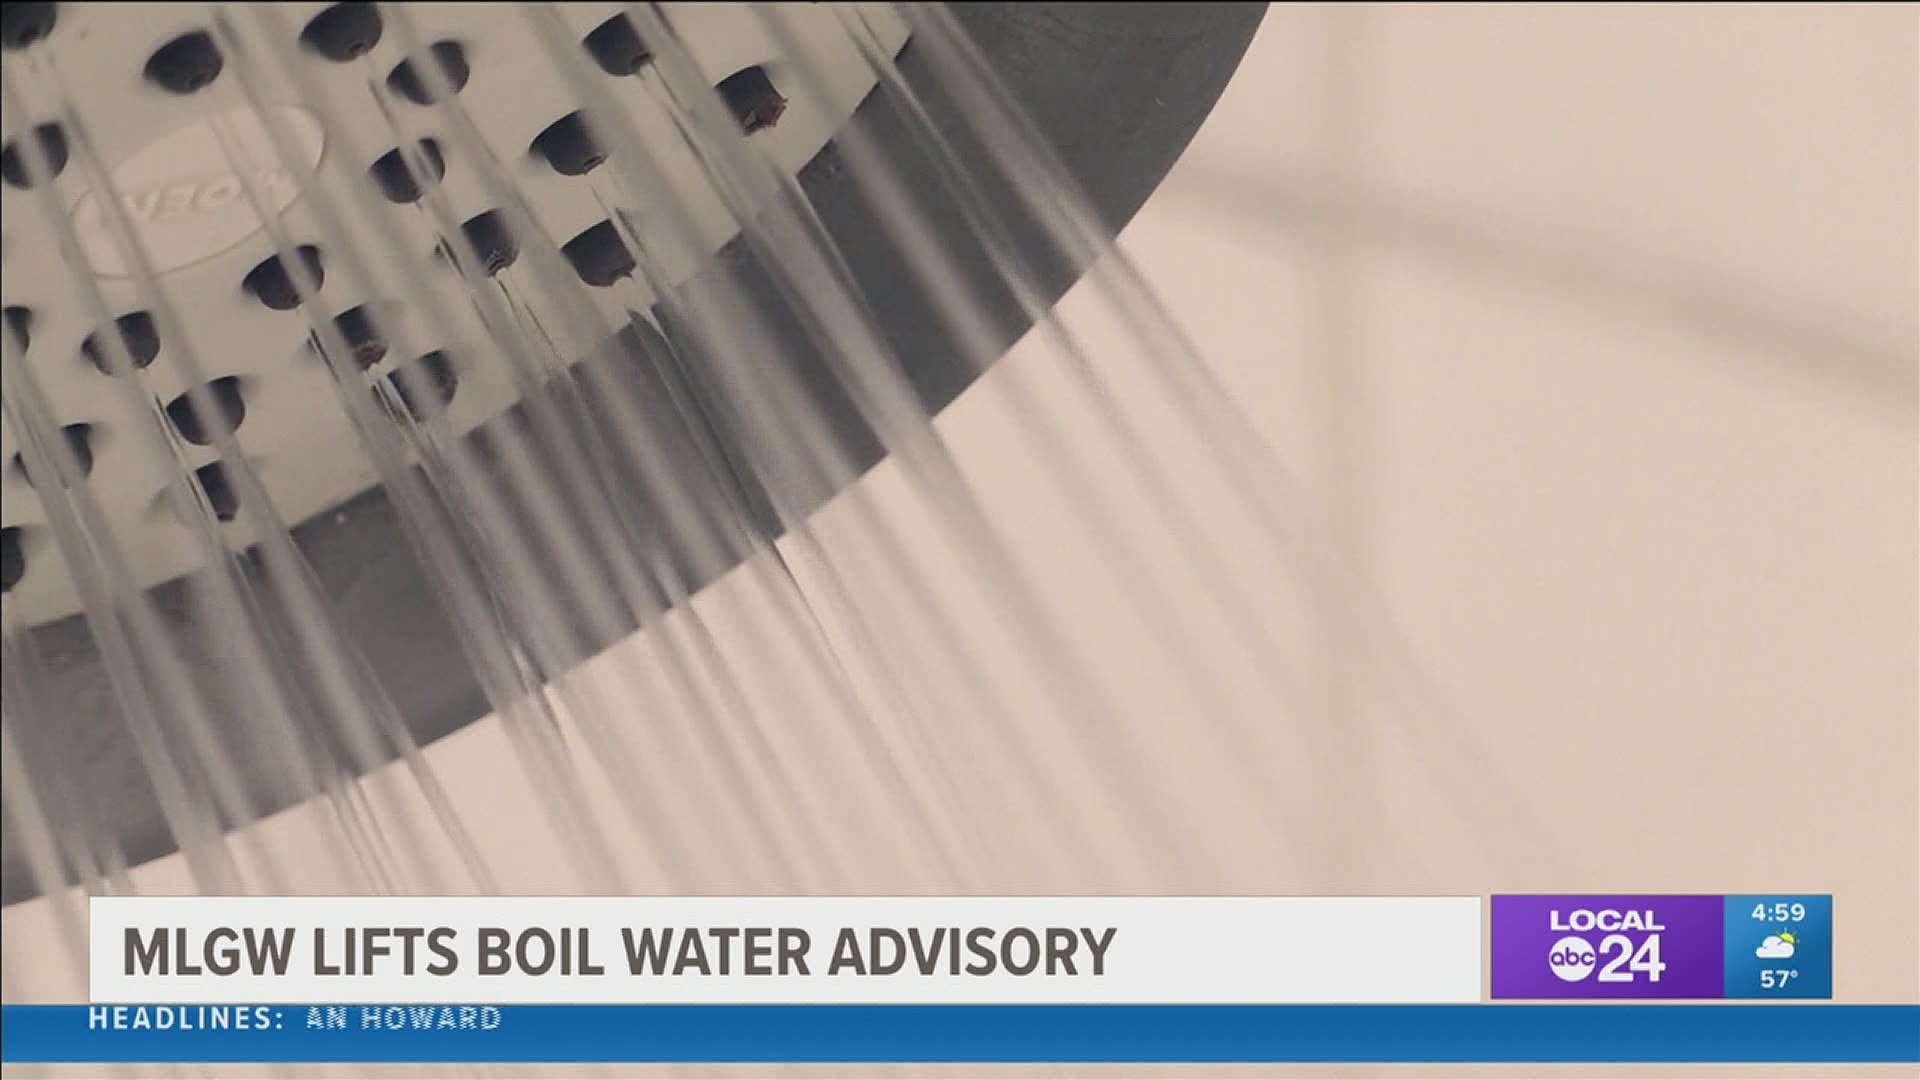 MLGW announced Thursday the boil water advisory for customers has been lifted.